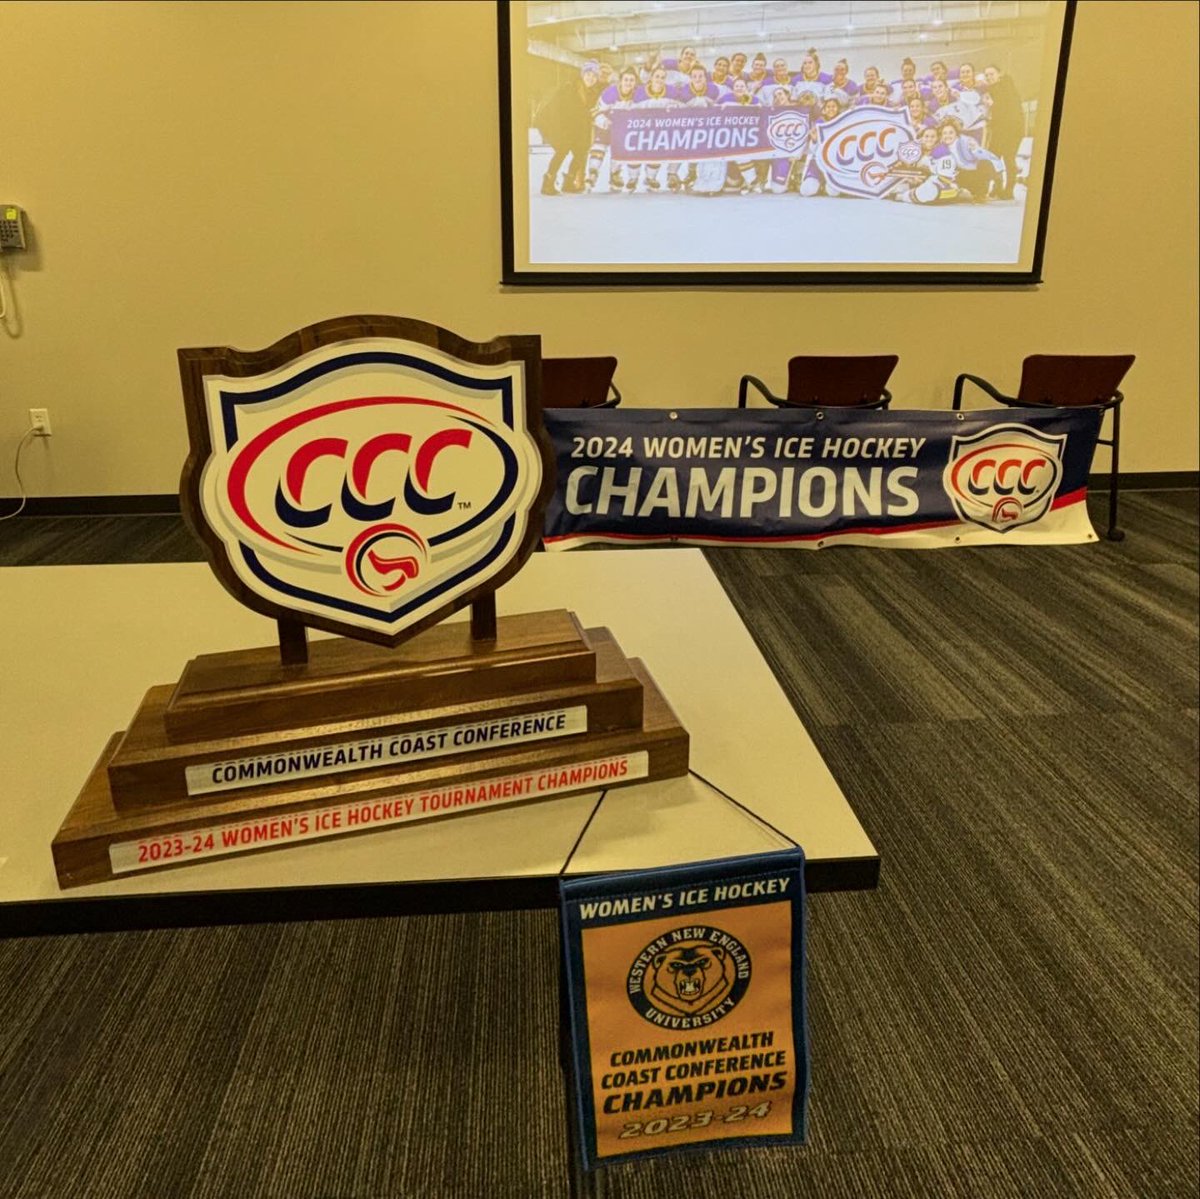 We got the squad together for an end-of-season celebration last night! Bingo, ice cream, season recap and team video… It’s always fun to reconnect in the off-season, made all the more special when celebrating a championship! 🏆 #CCCChamps #GoldenBearNation #ForeverChampions